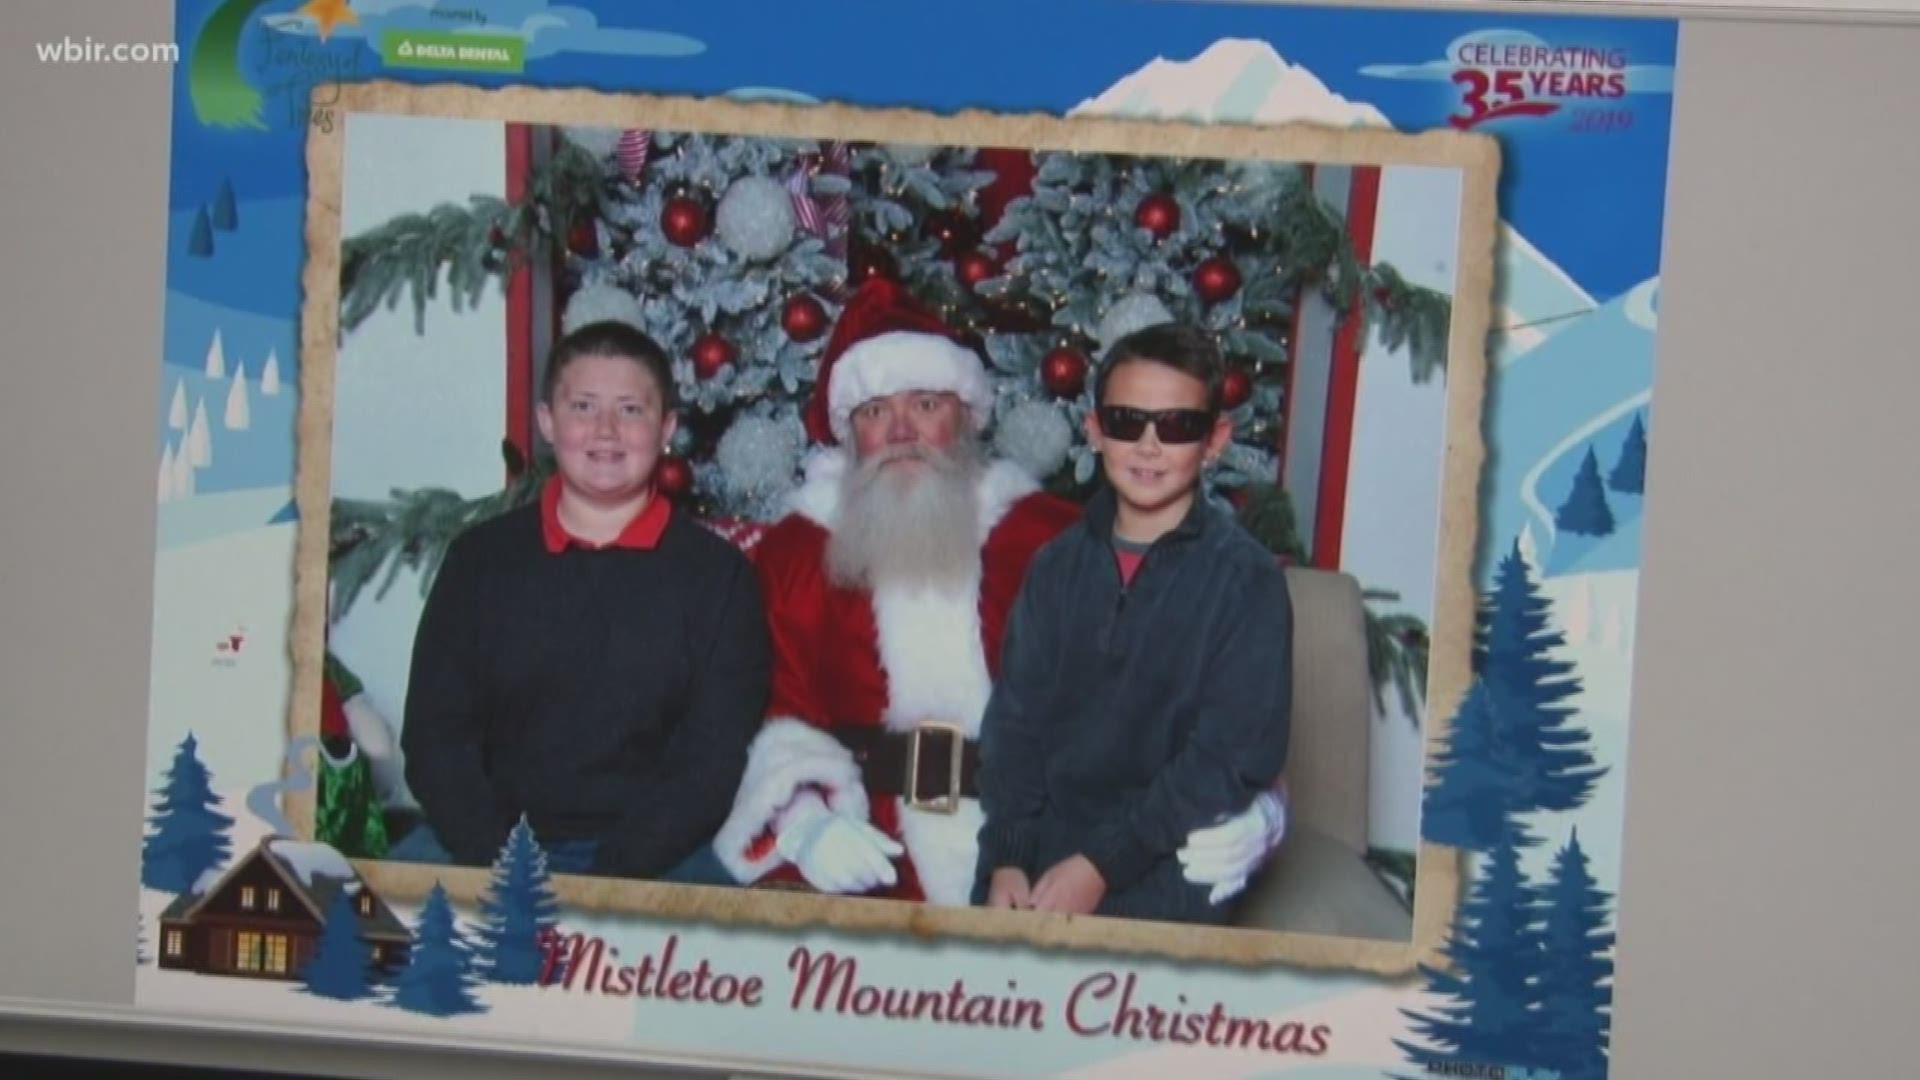 Every year the Teske family visits the Fantasy of Trees for a family photo with Santa.